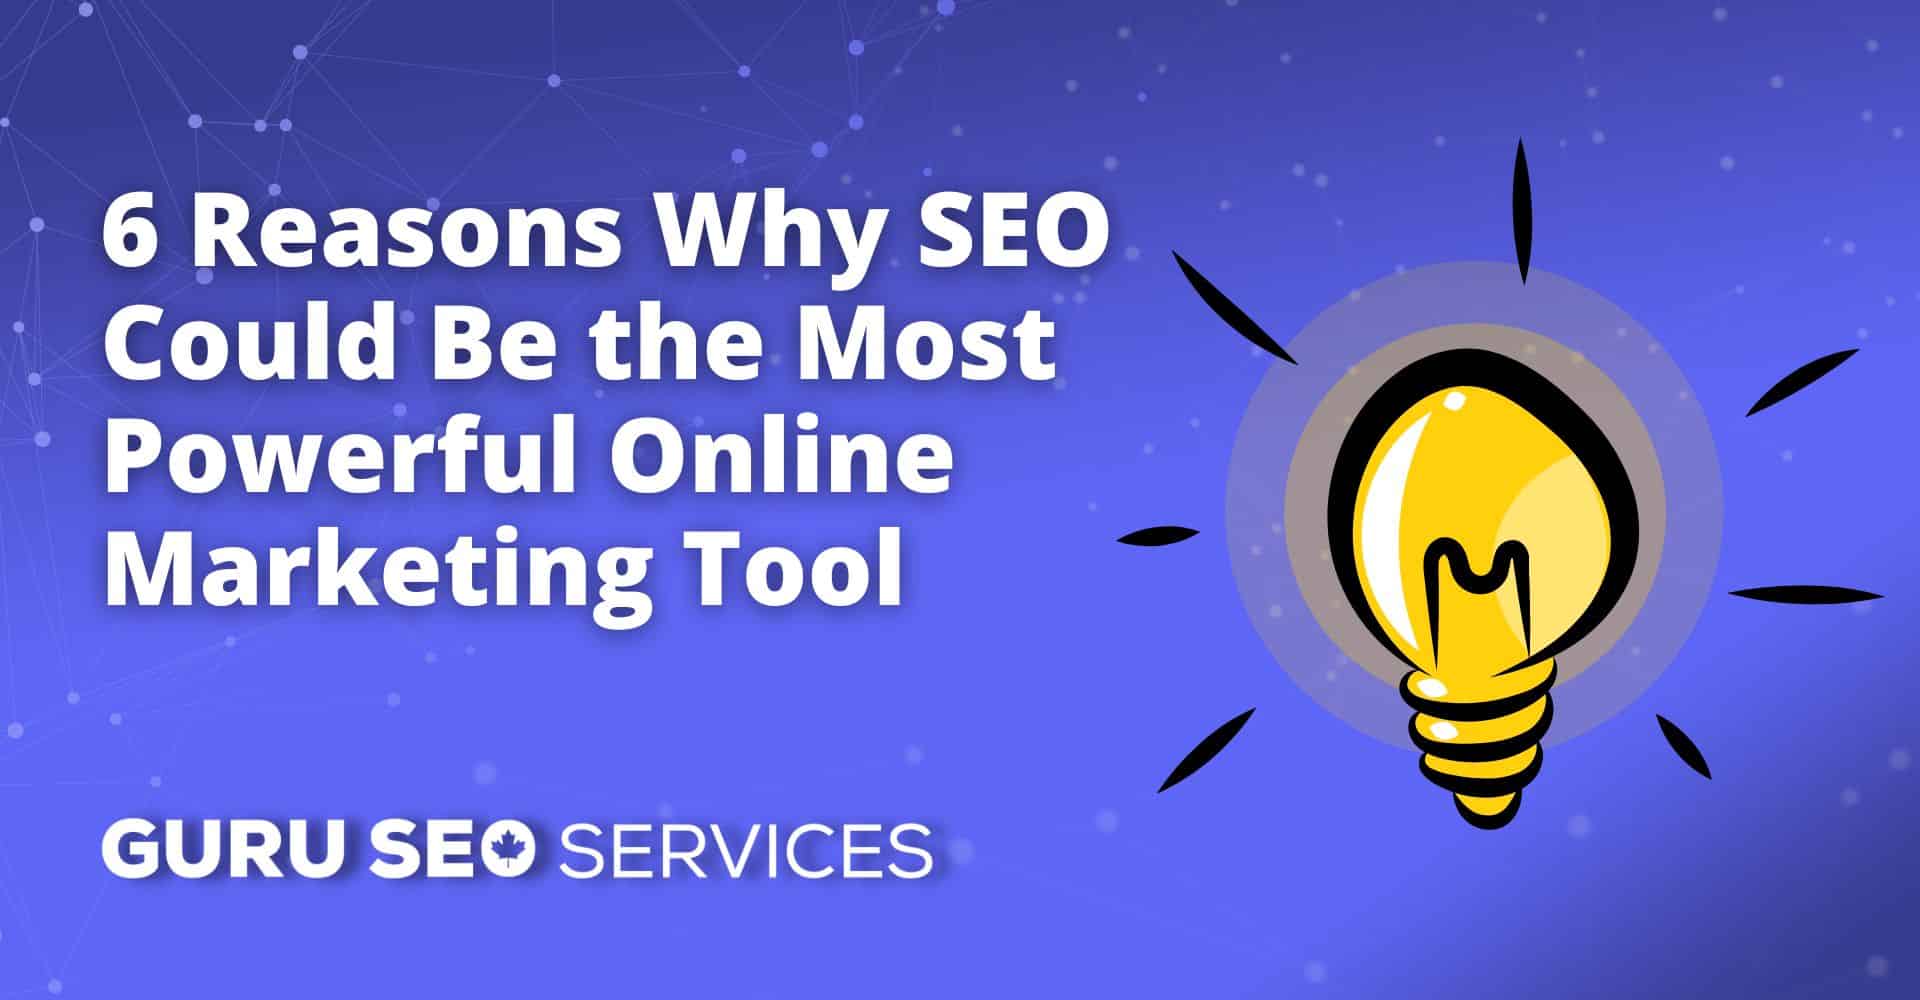 Discover the 6 reasons why SEO stands out as the most powerful online marketing tool.